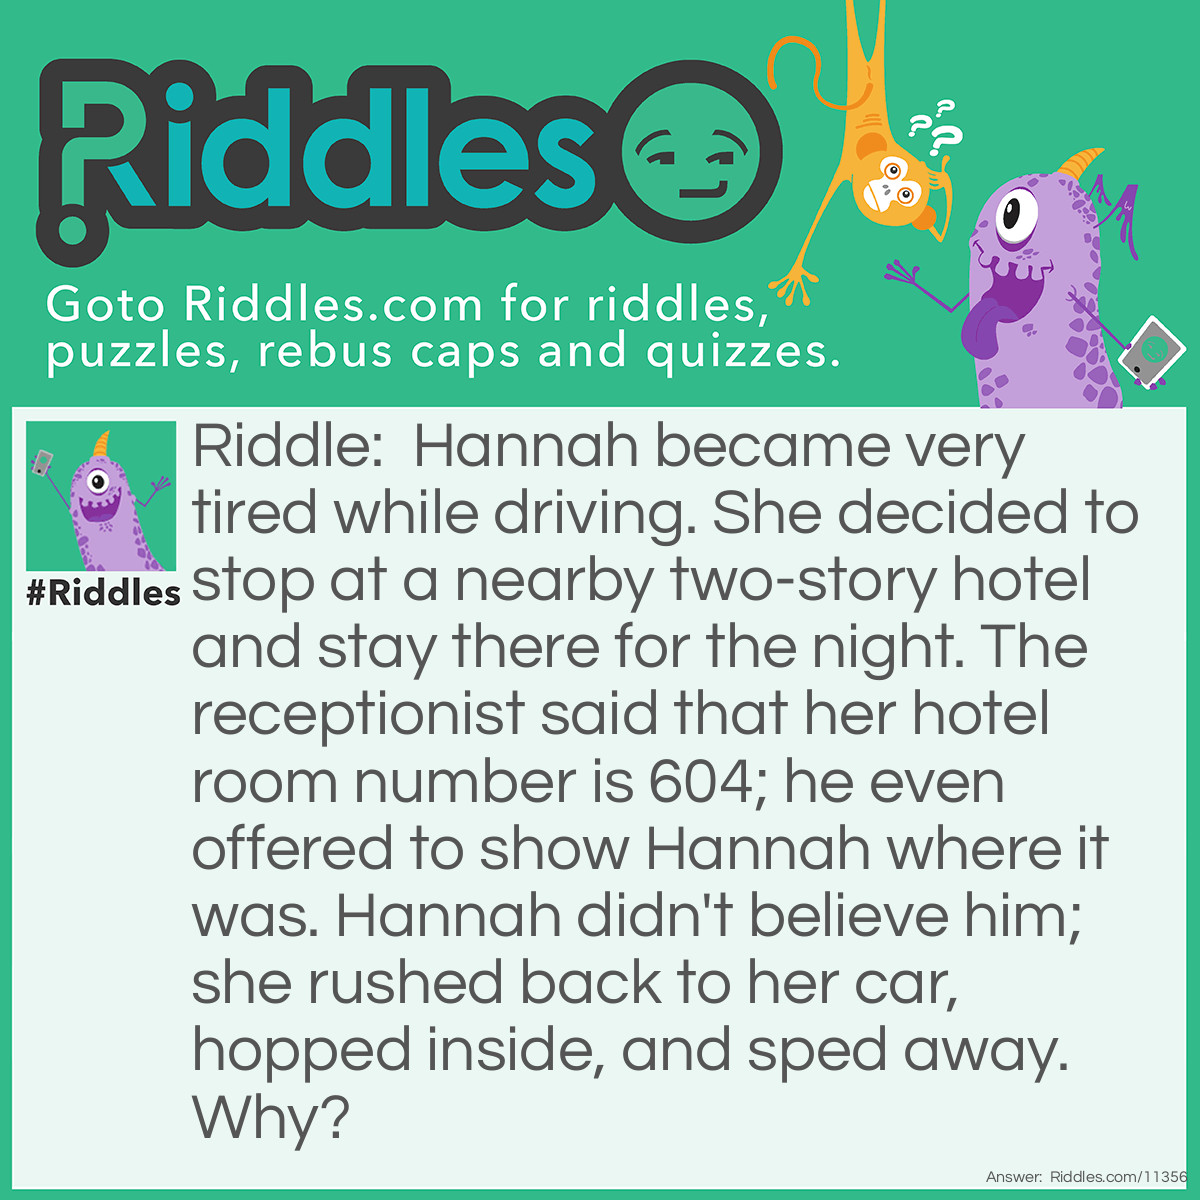 Riddle: Hannah became very tired while driving. She decided to stop at a nearby two-story hotel and stay there for the night. The receptionist said that her hotel room number is 604; he even offered to show Hannah where it was. Hannah didn't believe him; she rushed back to her car, hopped inside, and sped away. Why? Answer: The first digit of a hotel room number usually indicates the floor it is on. Room 604 is supposed to be on the sixth floor, but the hotel only has two floors.